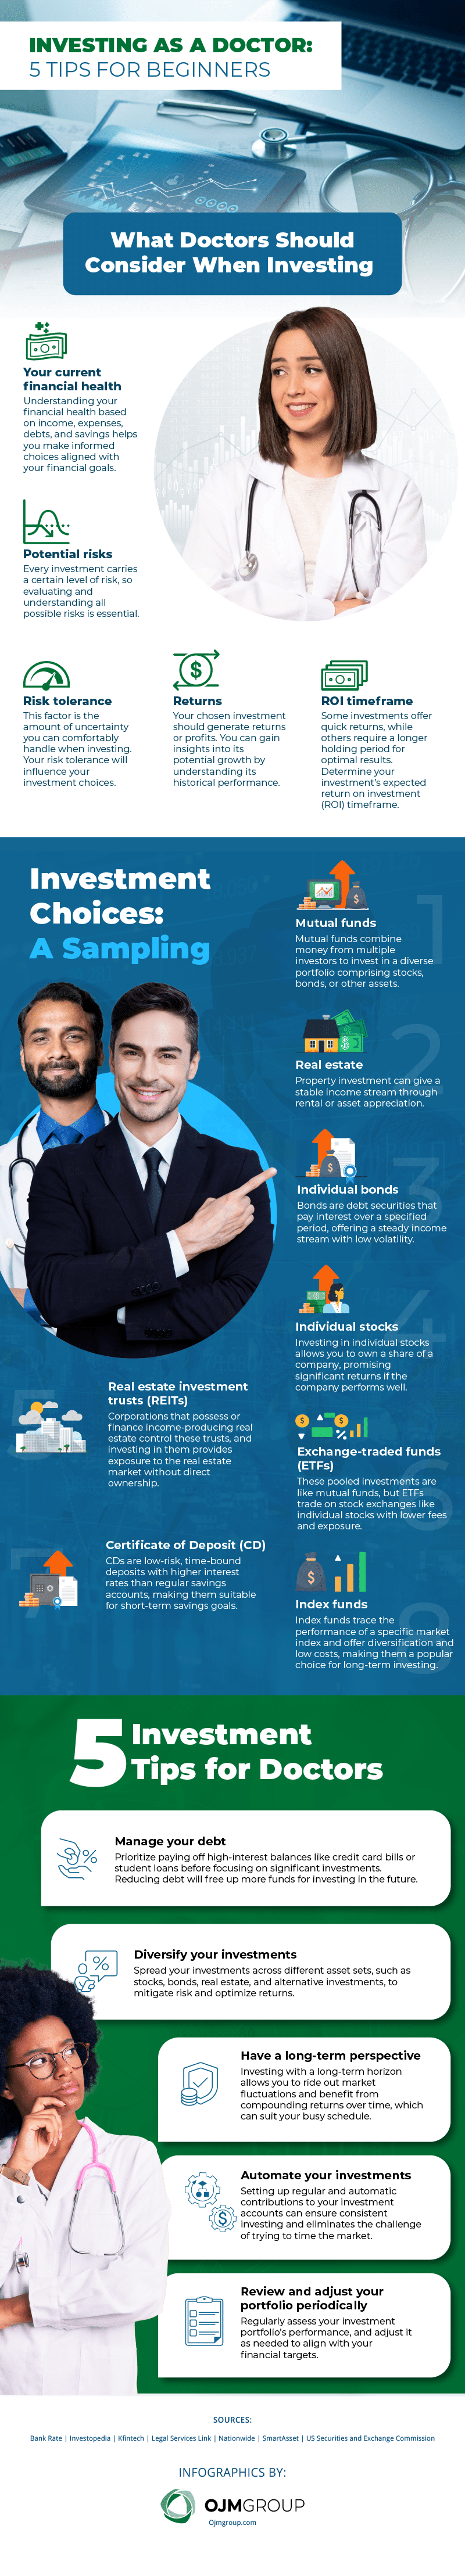 infographic showing investment tips for beginner doctors